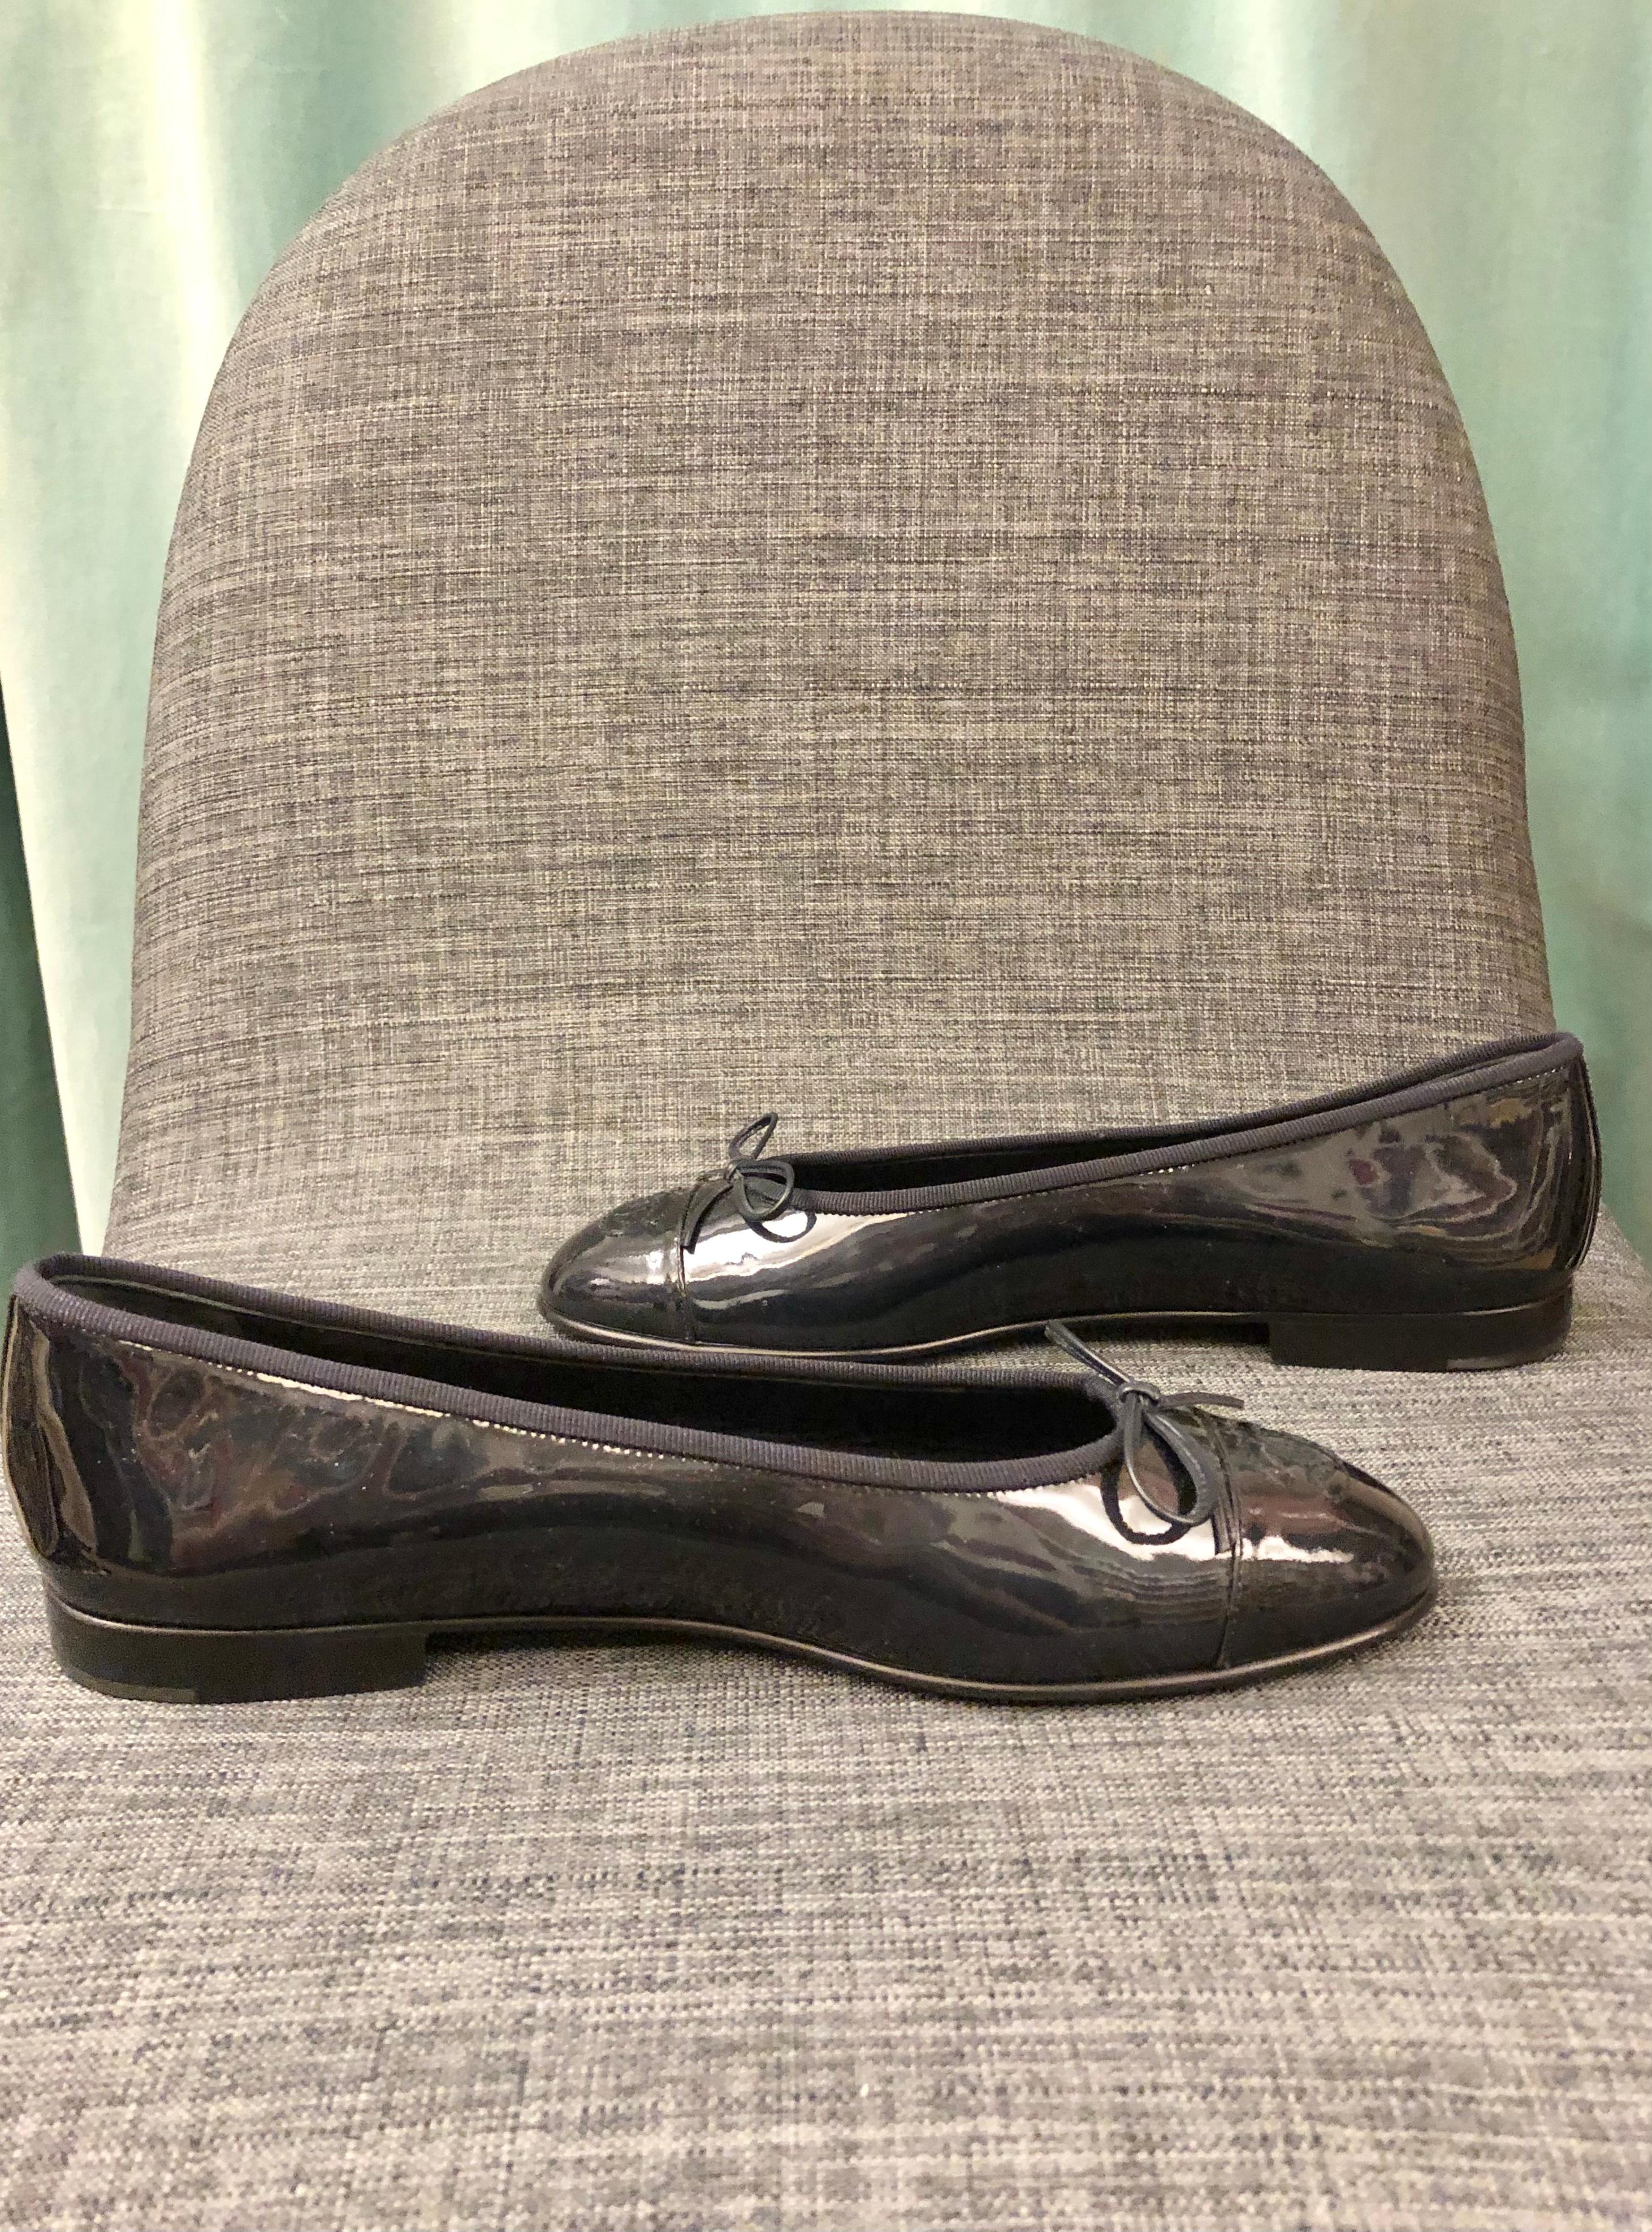  Chanel CC Ballerina Flats in Navy Patent Leather   In Excellent Condition For Sale In Sheung Wan, HK